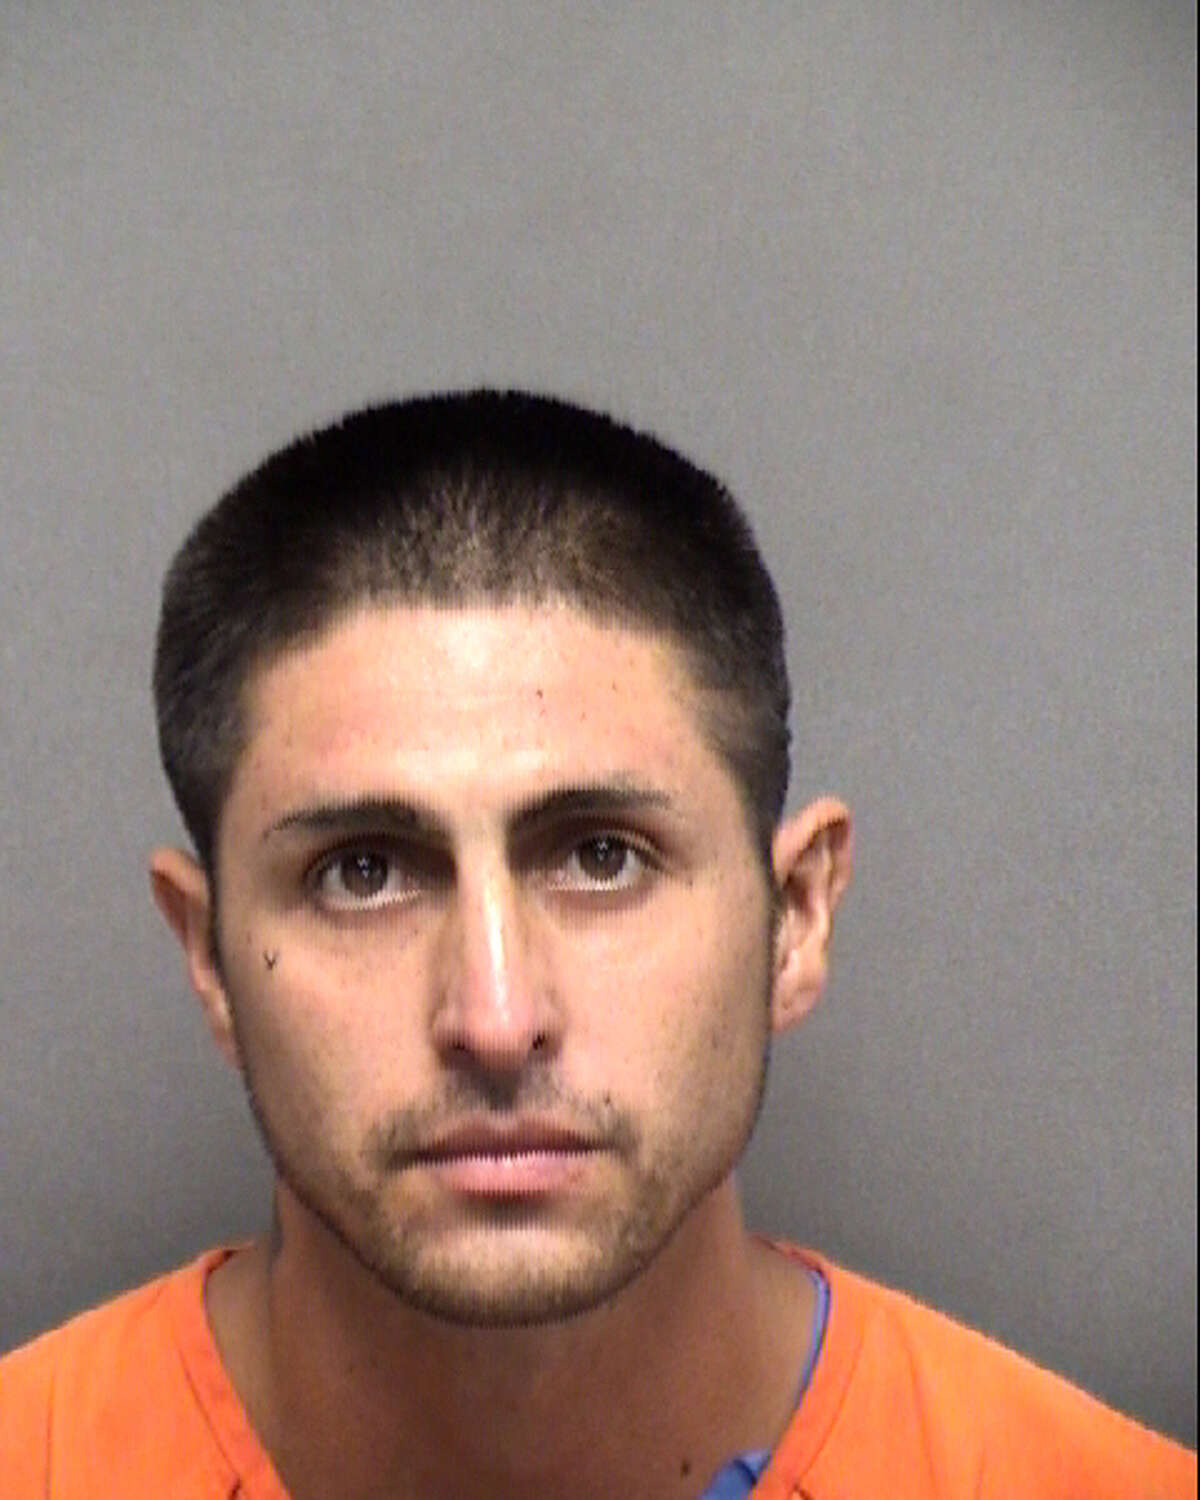 Rolando Salas Fernandez, 30, is charged with sexual assault of a child.